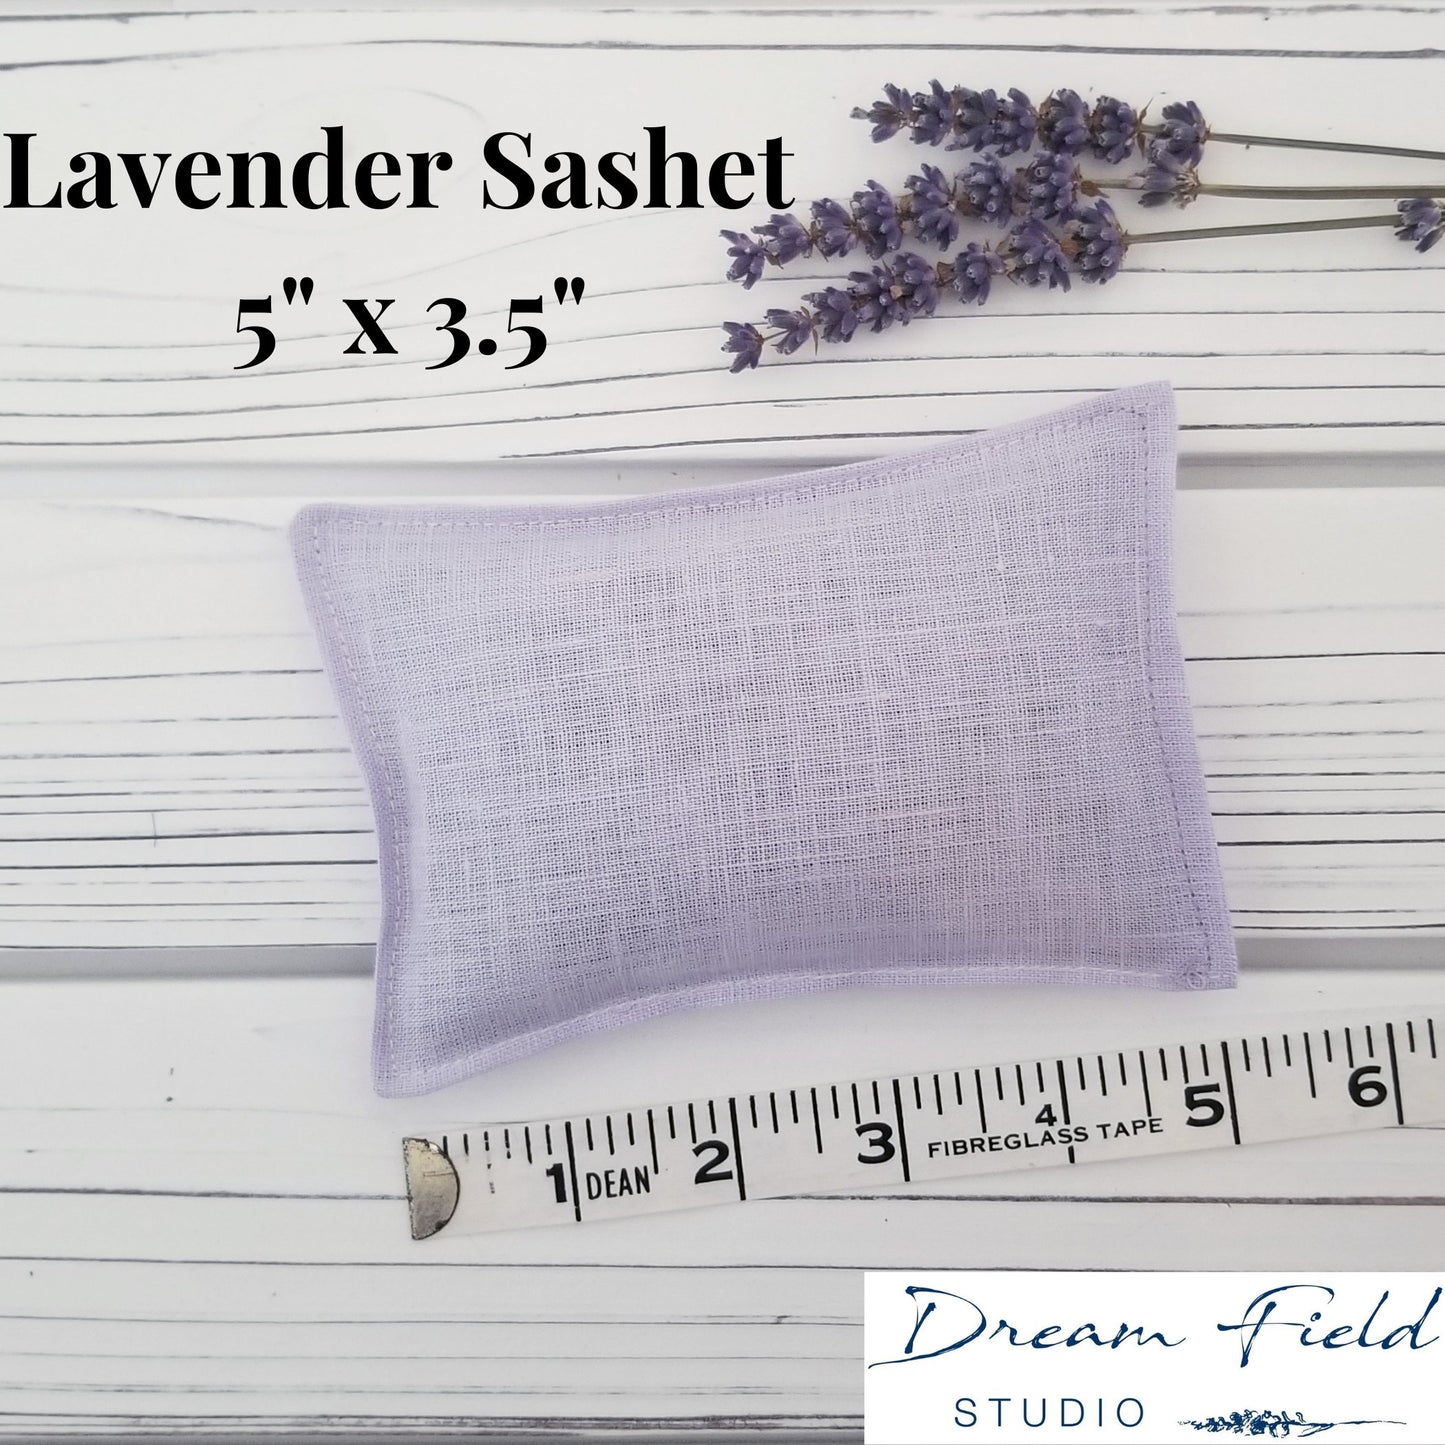 infographic showing size of lavender sachets